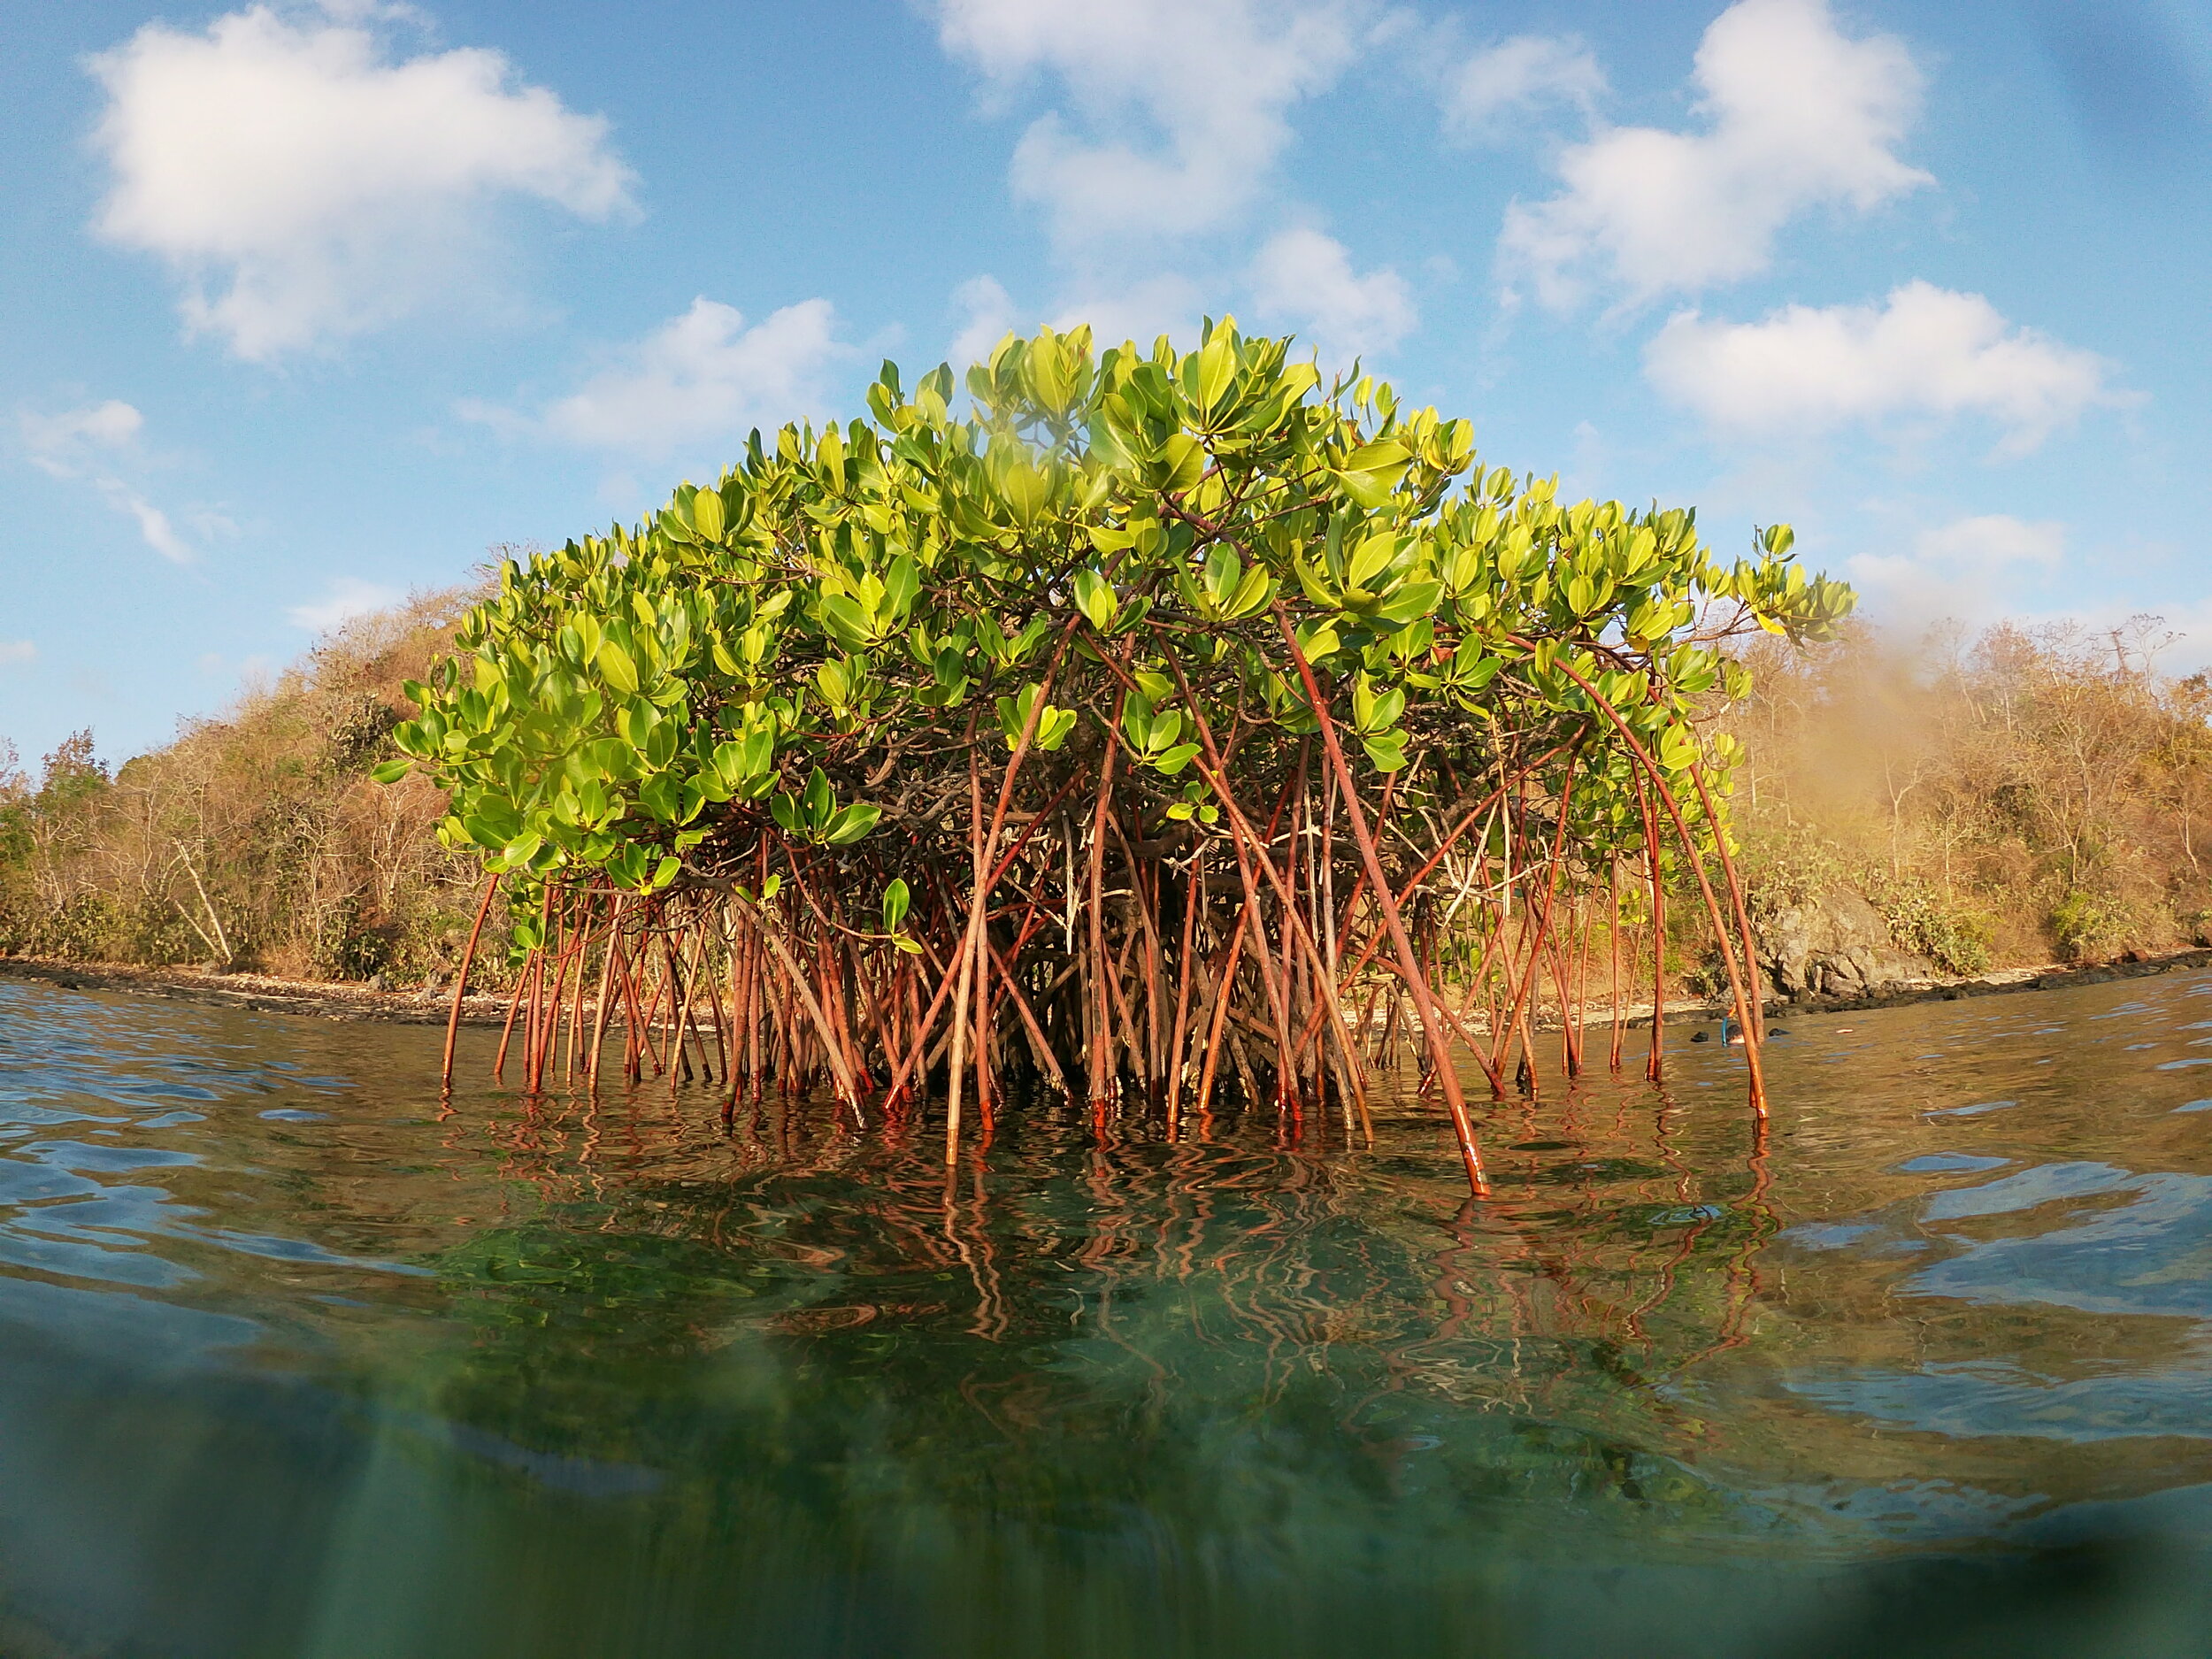 The Lone Mangrove at Gili Goleng, photo by Gretchen Coffman